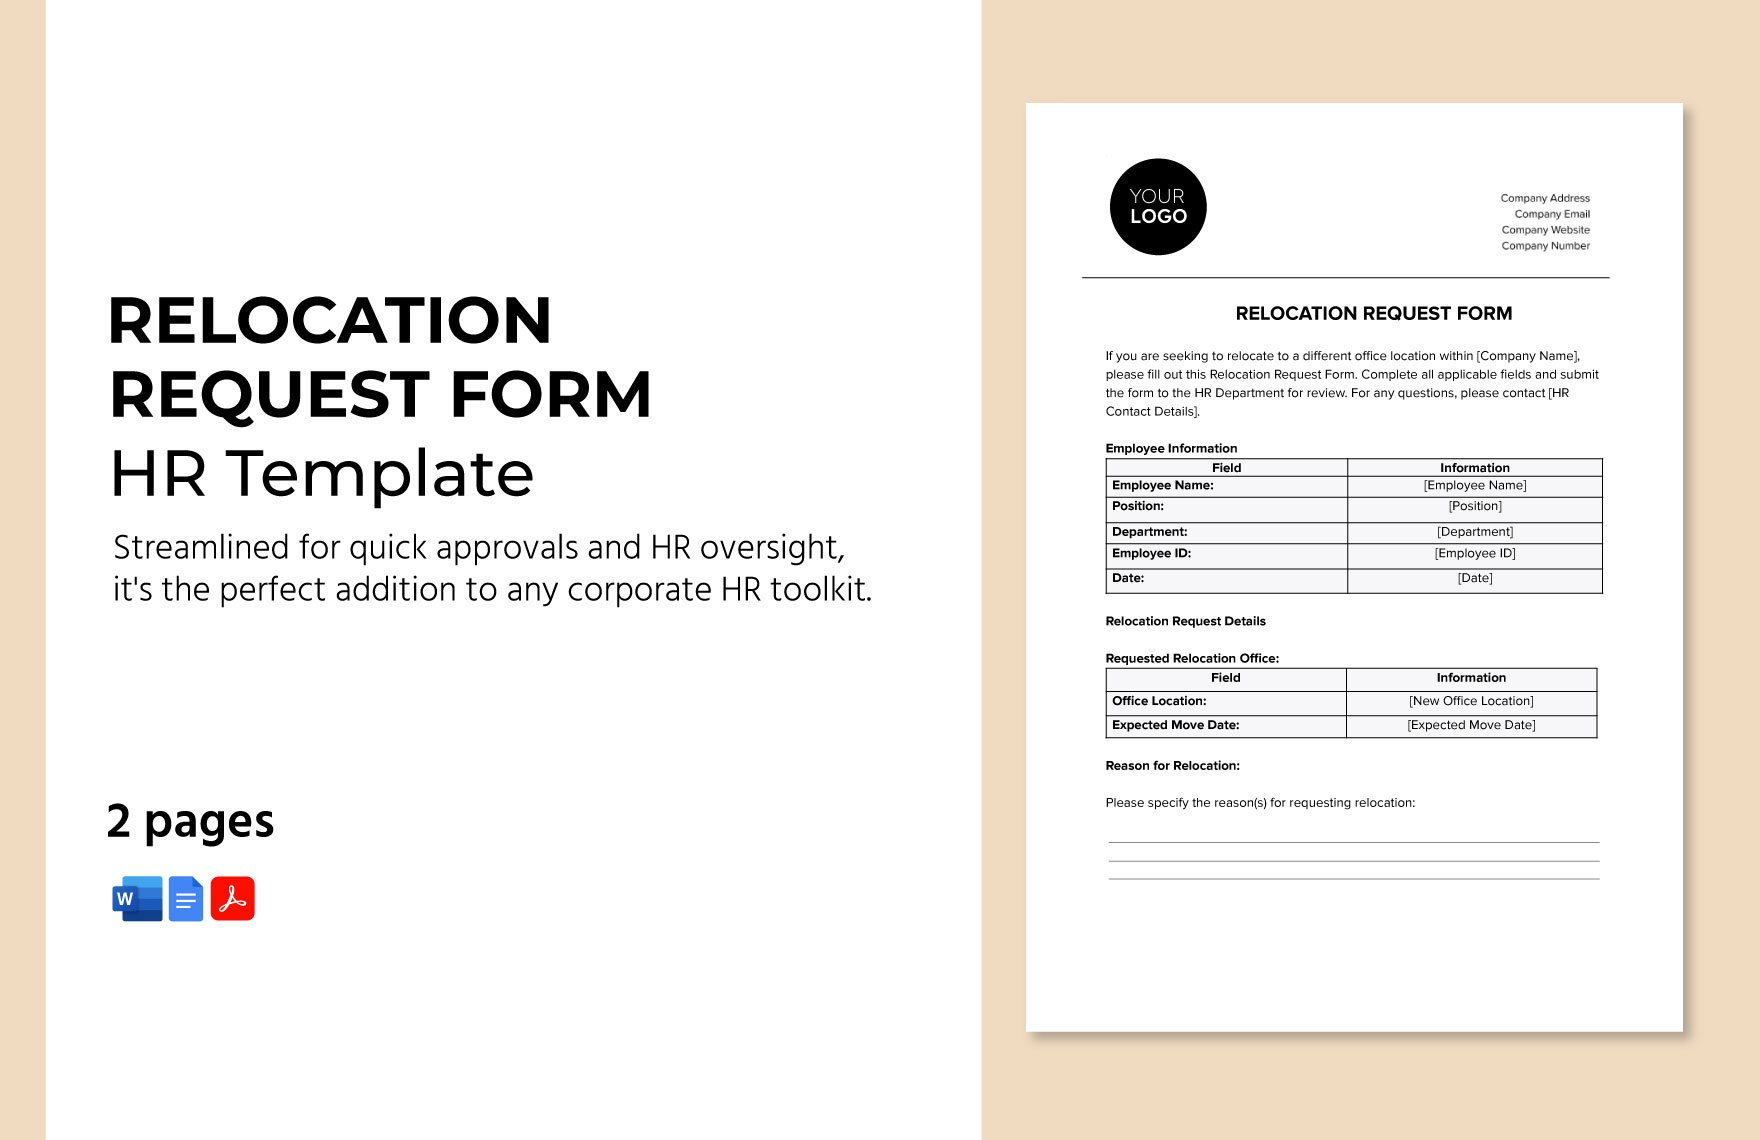 Relocation Request Form HR Template in Word, Google Docs, PDF